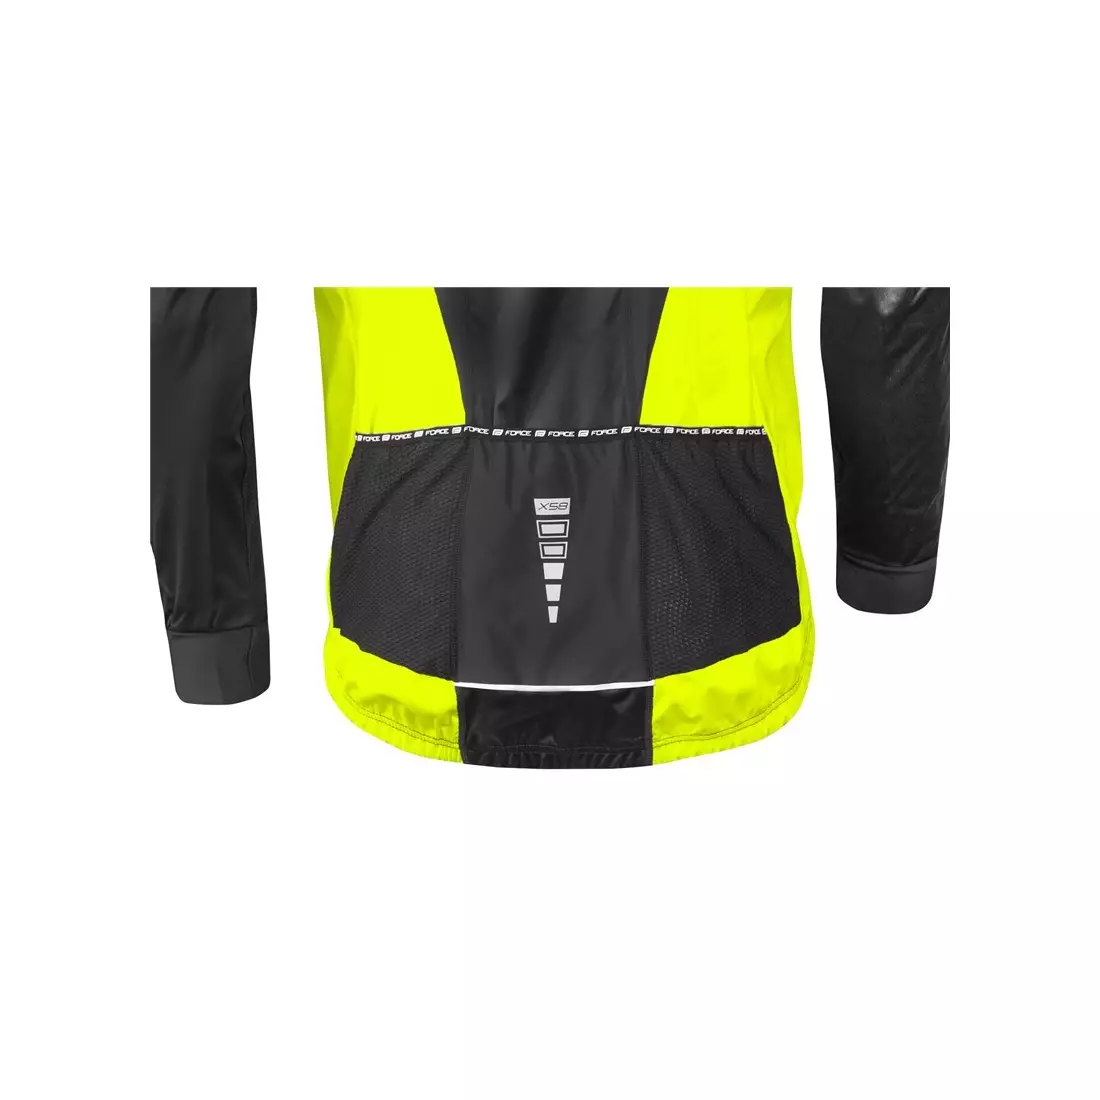 FORCE X58 light jacket, cycling windbreaker for the transition period. black-fluor 899807